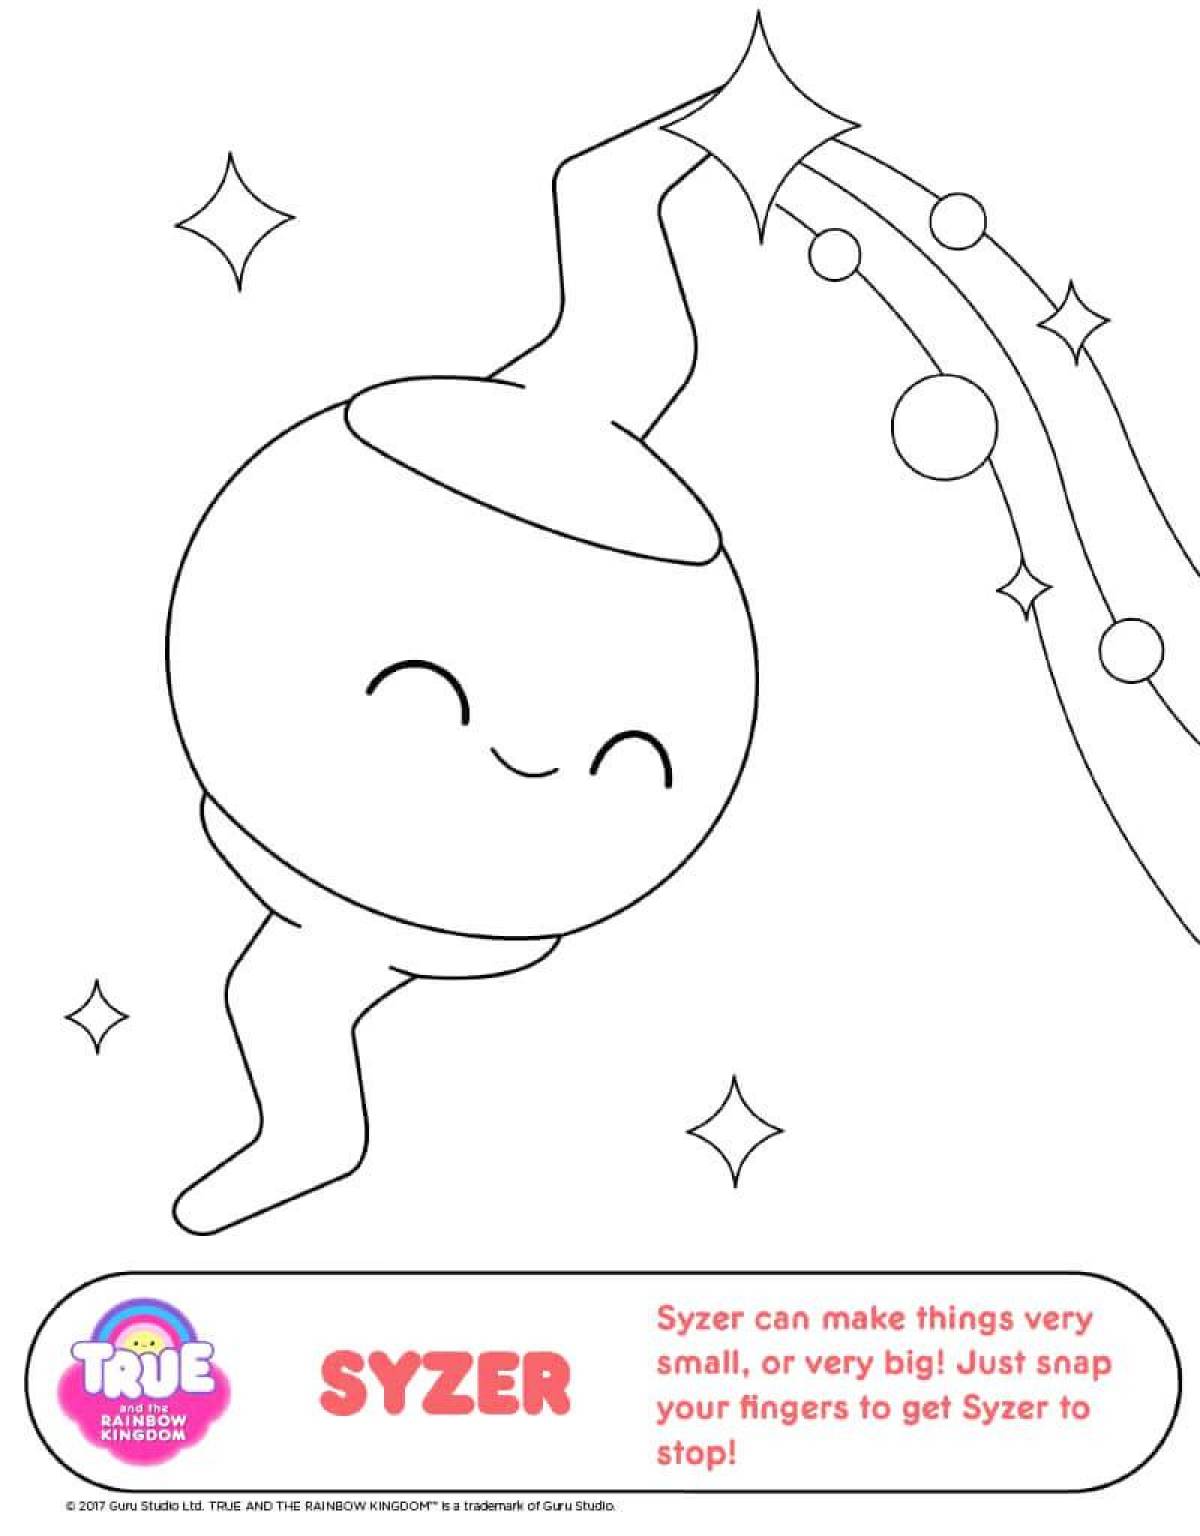 Exuberant coloring page true and the rainbow kingdom